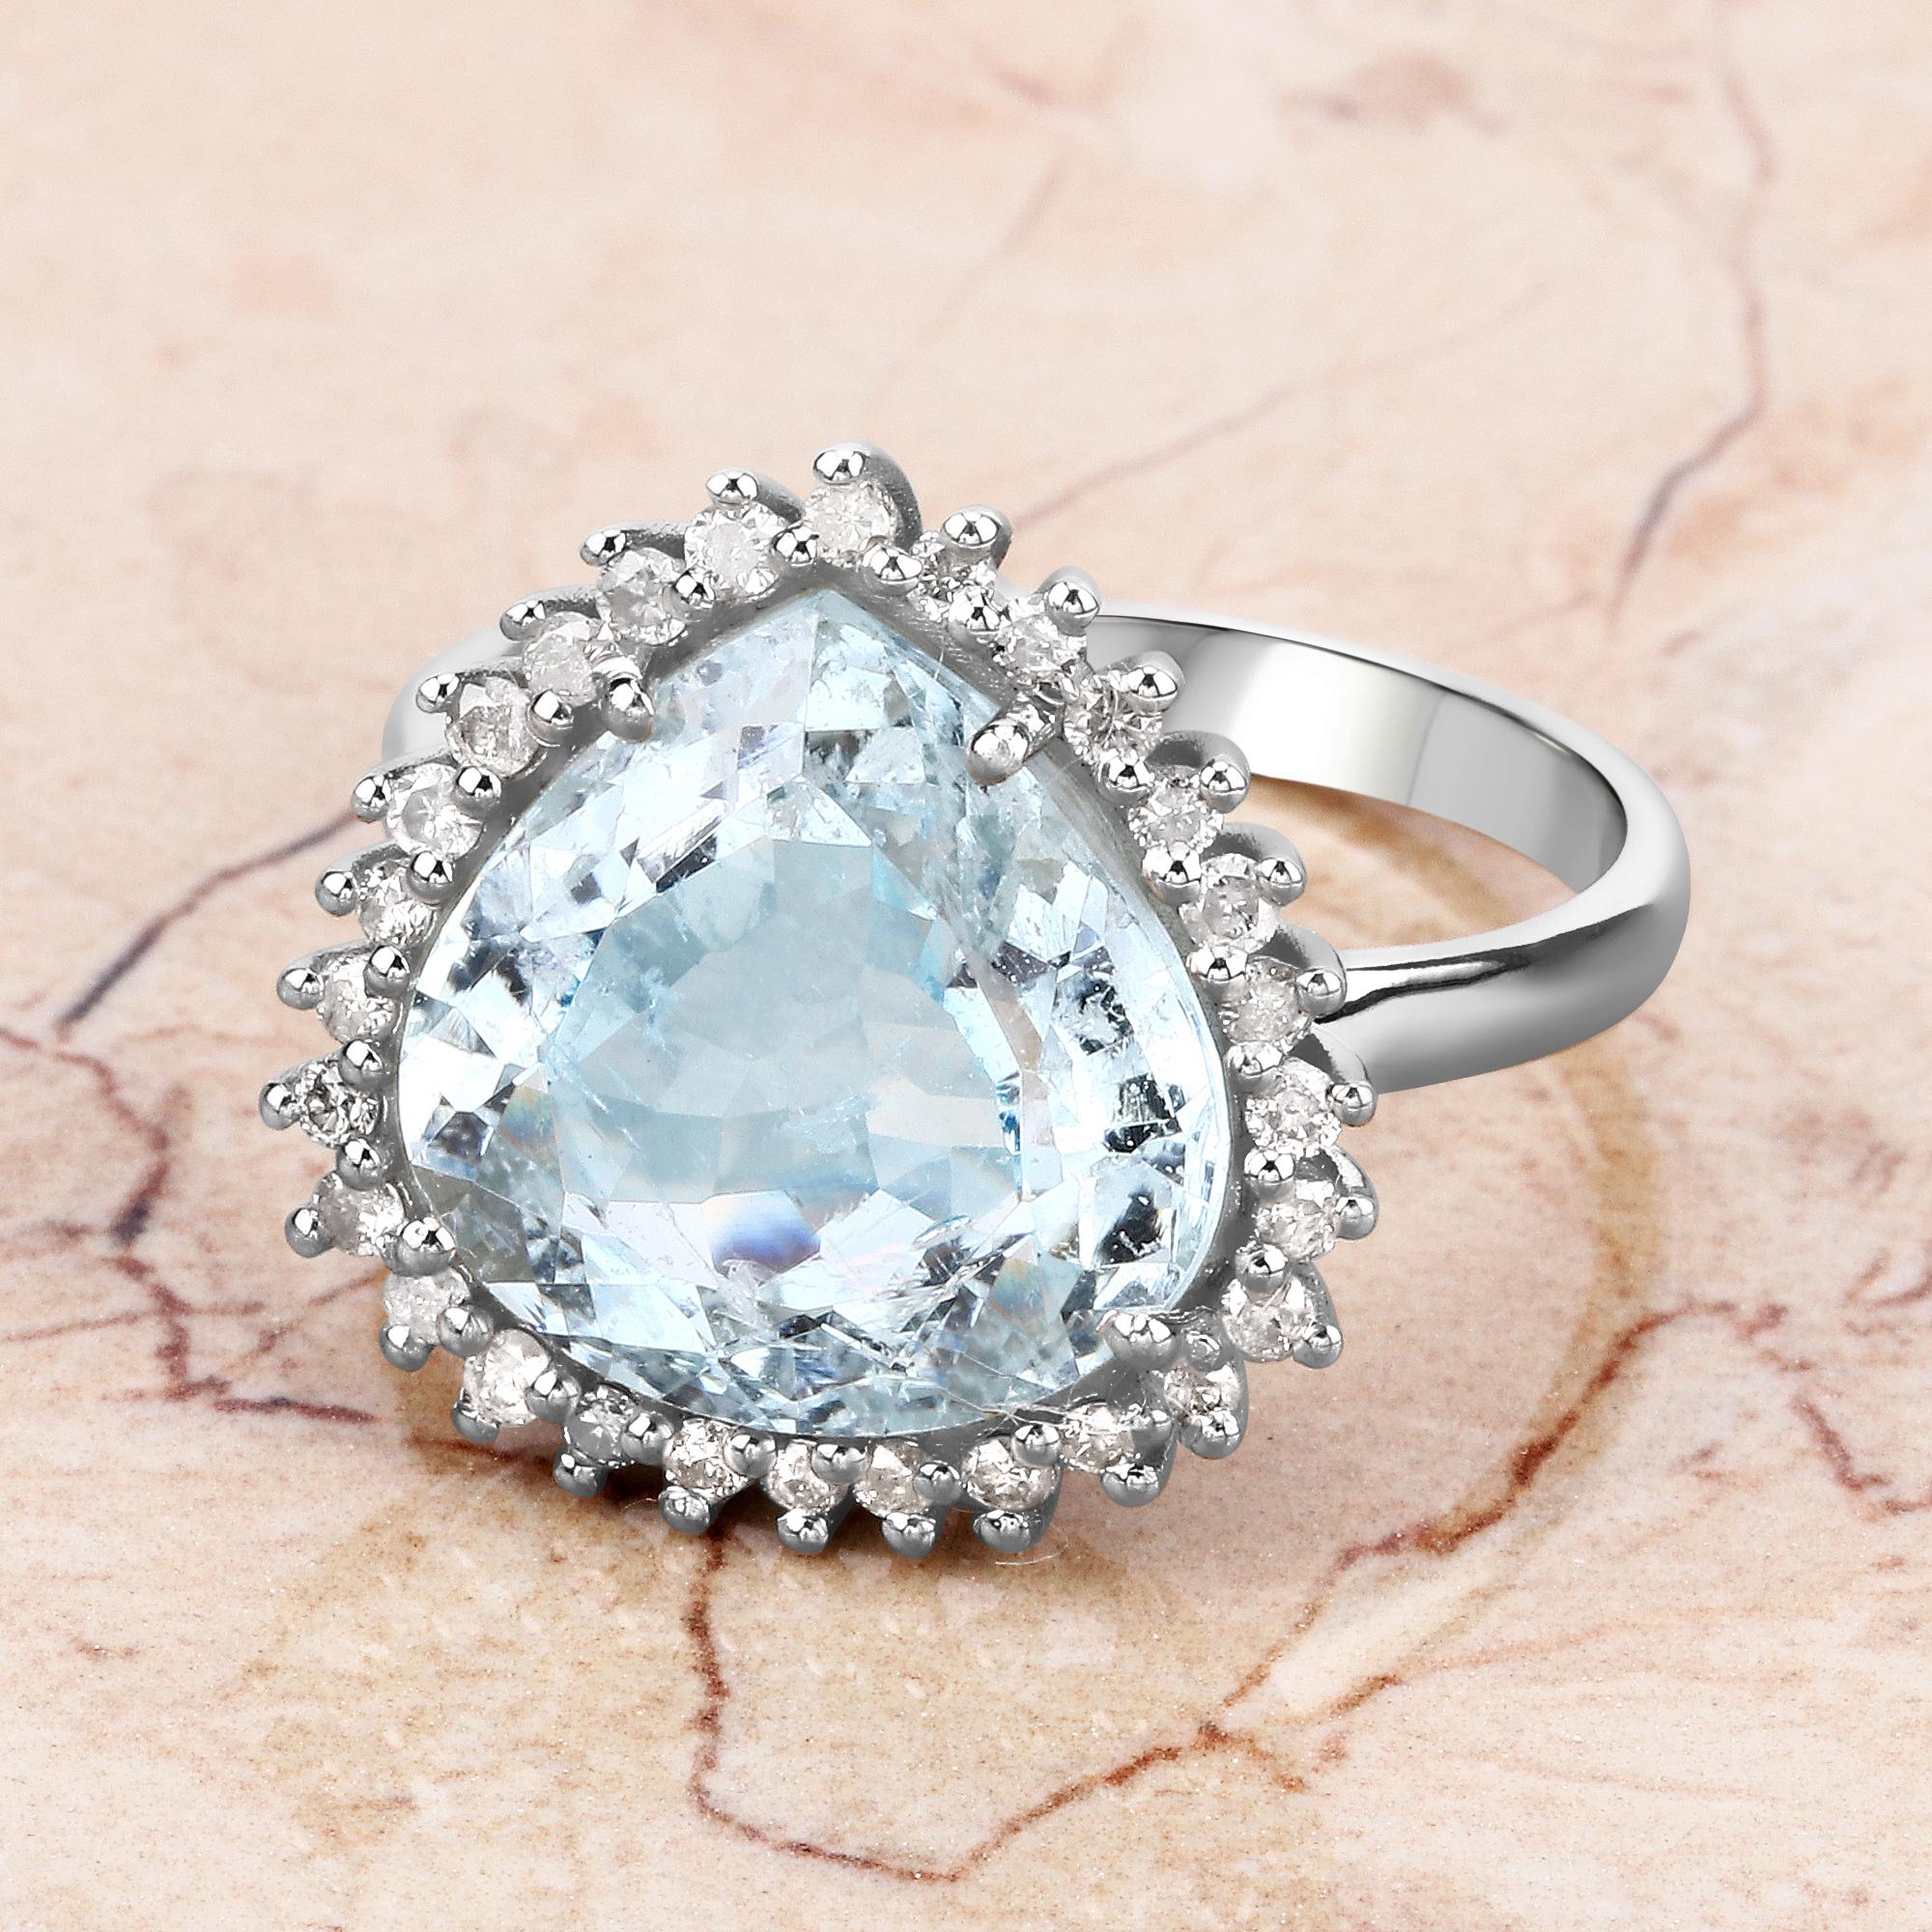 6.40cttw Aquamarine with Diamonds 0.45cttw Halo Sterling Silver Ring

Beautiful and elegant, our ring is a must-have for your jewelry collection. Intricately designed sterling silver beholds dazzling 6.40 ct. tw. pear-shape aquamarine with 0.45 ct.